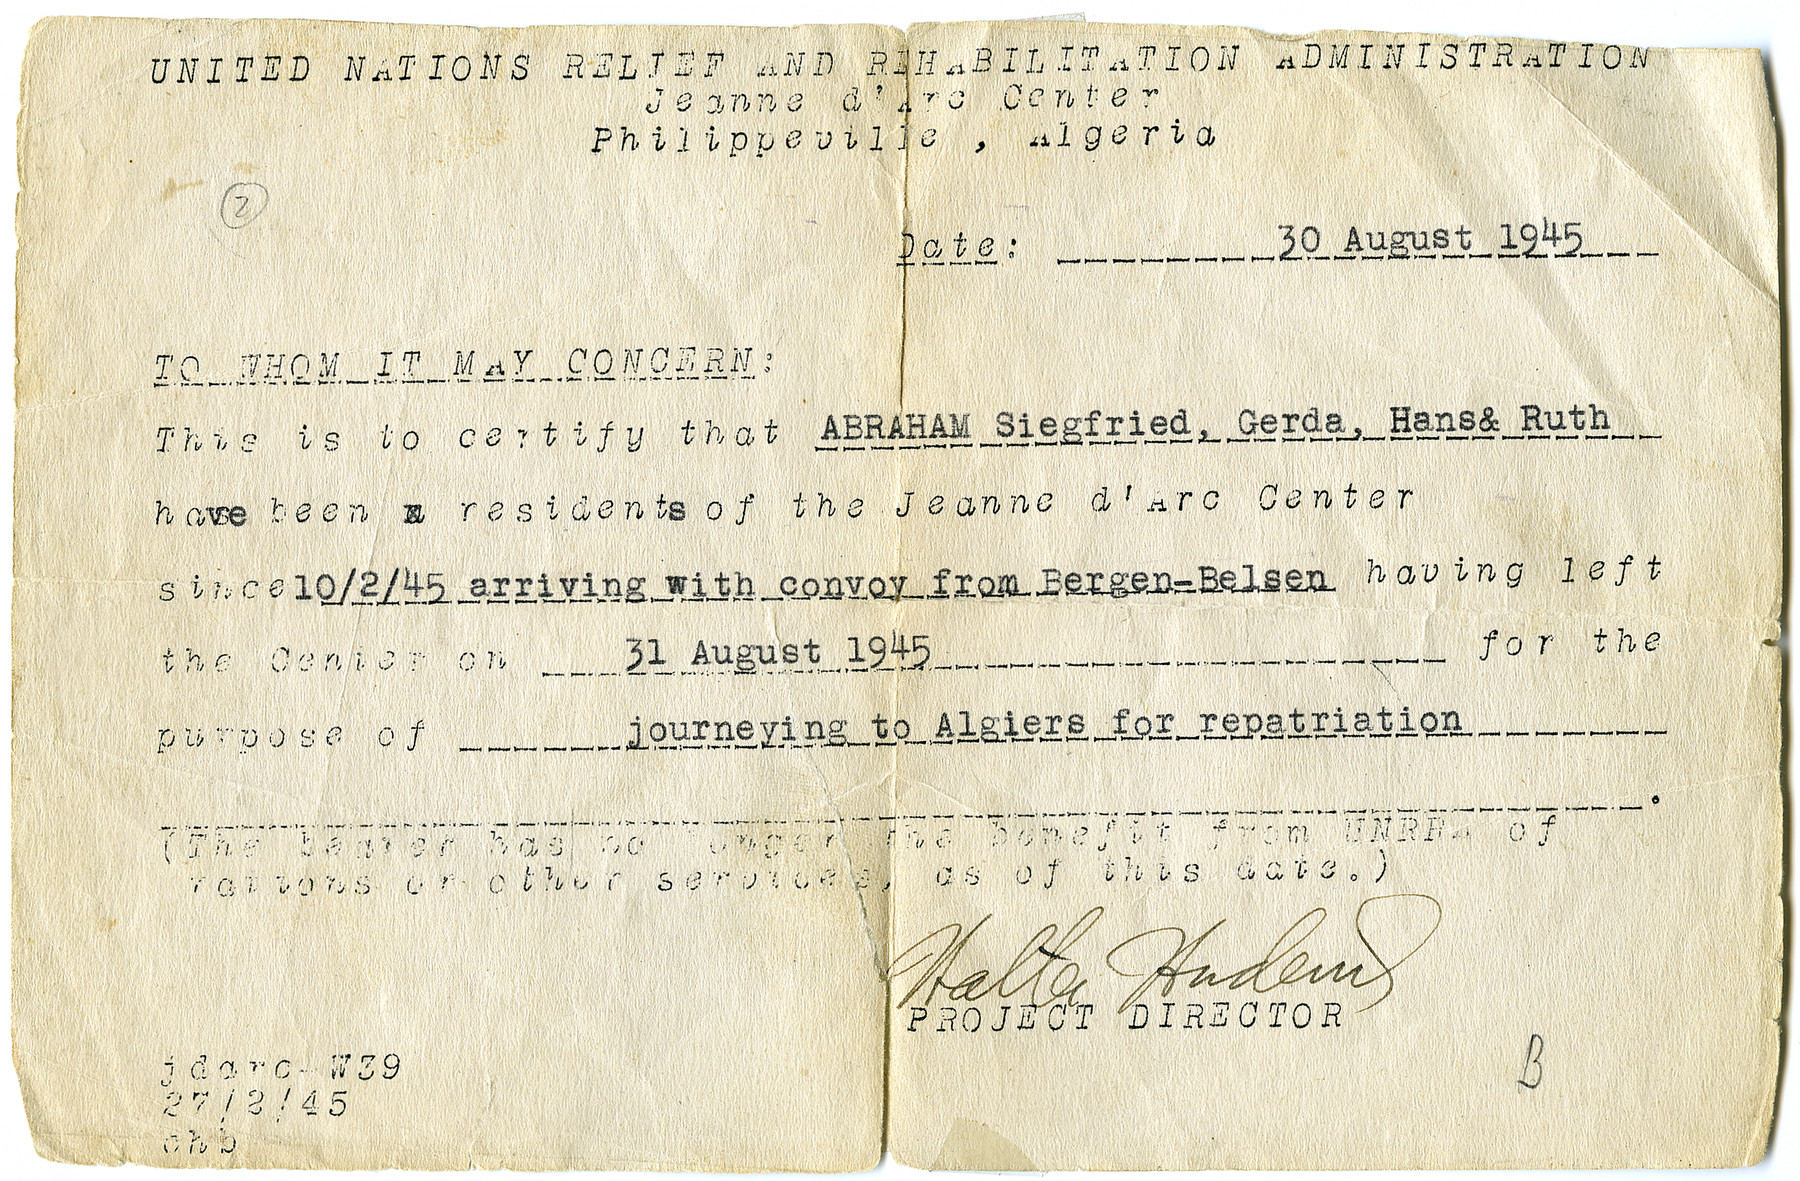 UNRRA card issued to the Abraham family stating they had arrived in the Philippeville camp following their release from Bergen-Belsen and were now journying to Algiers for repatriation.